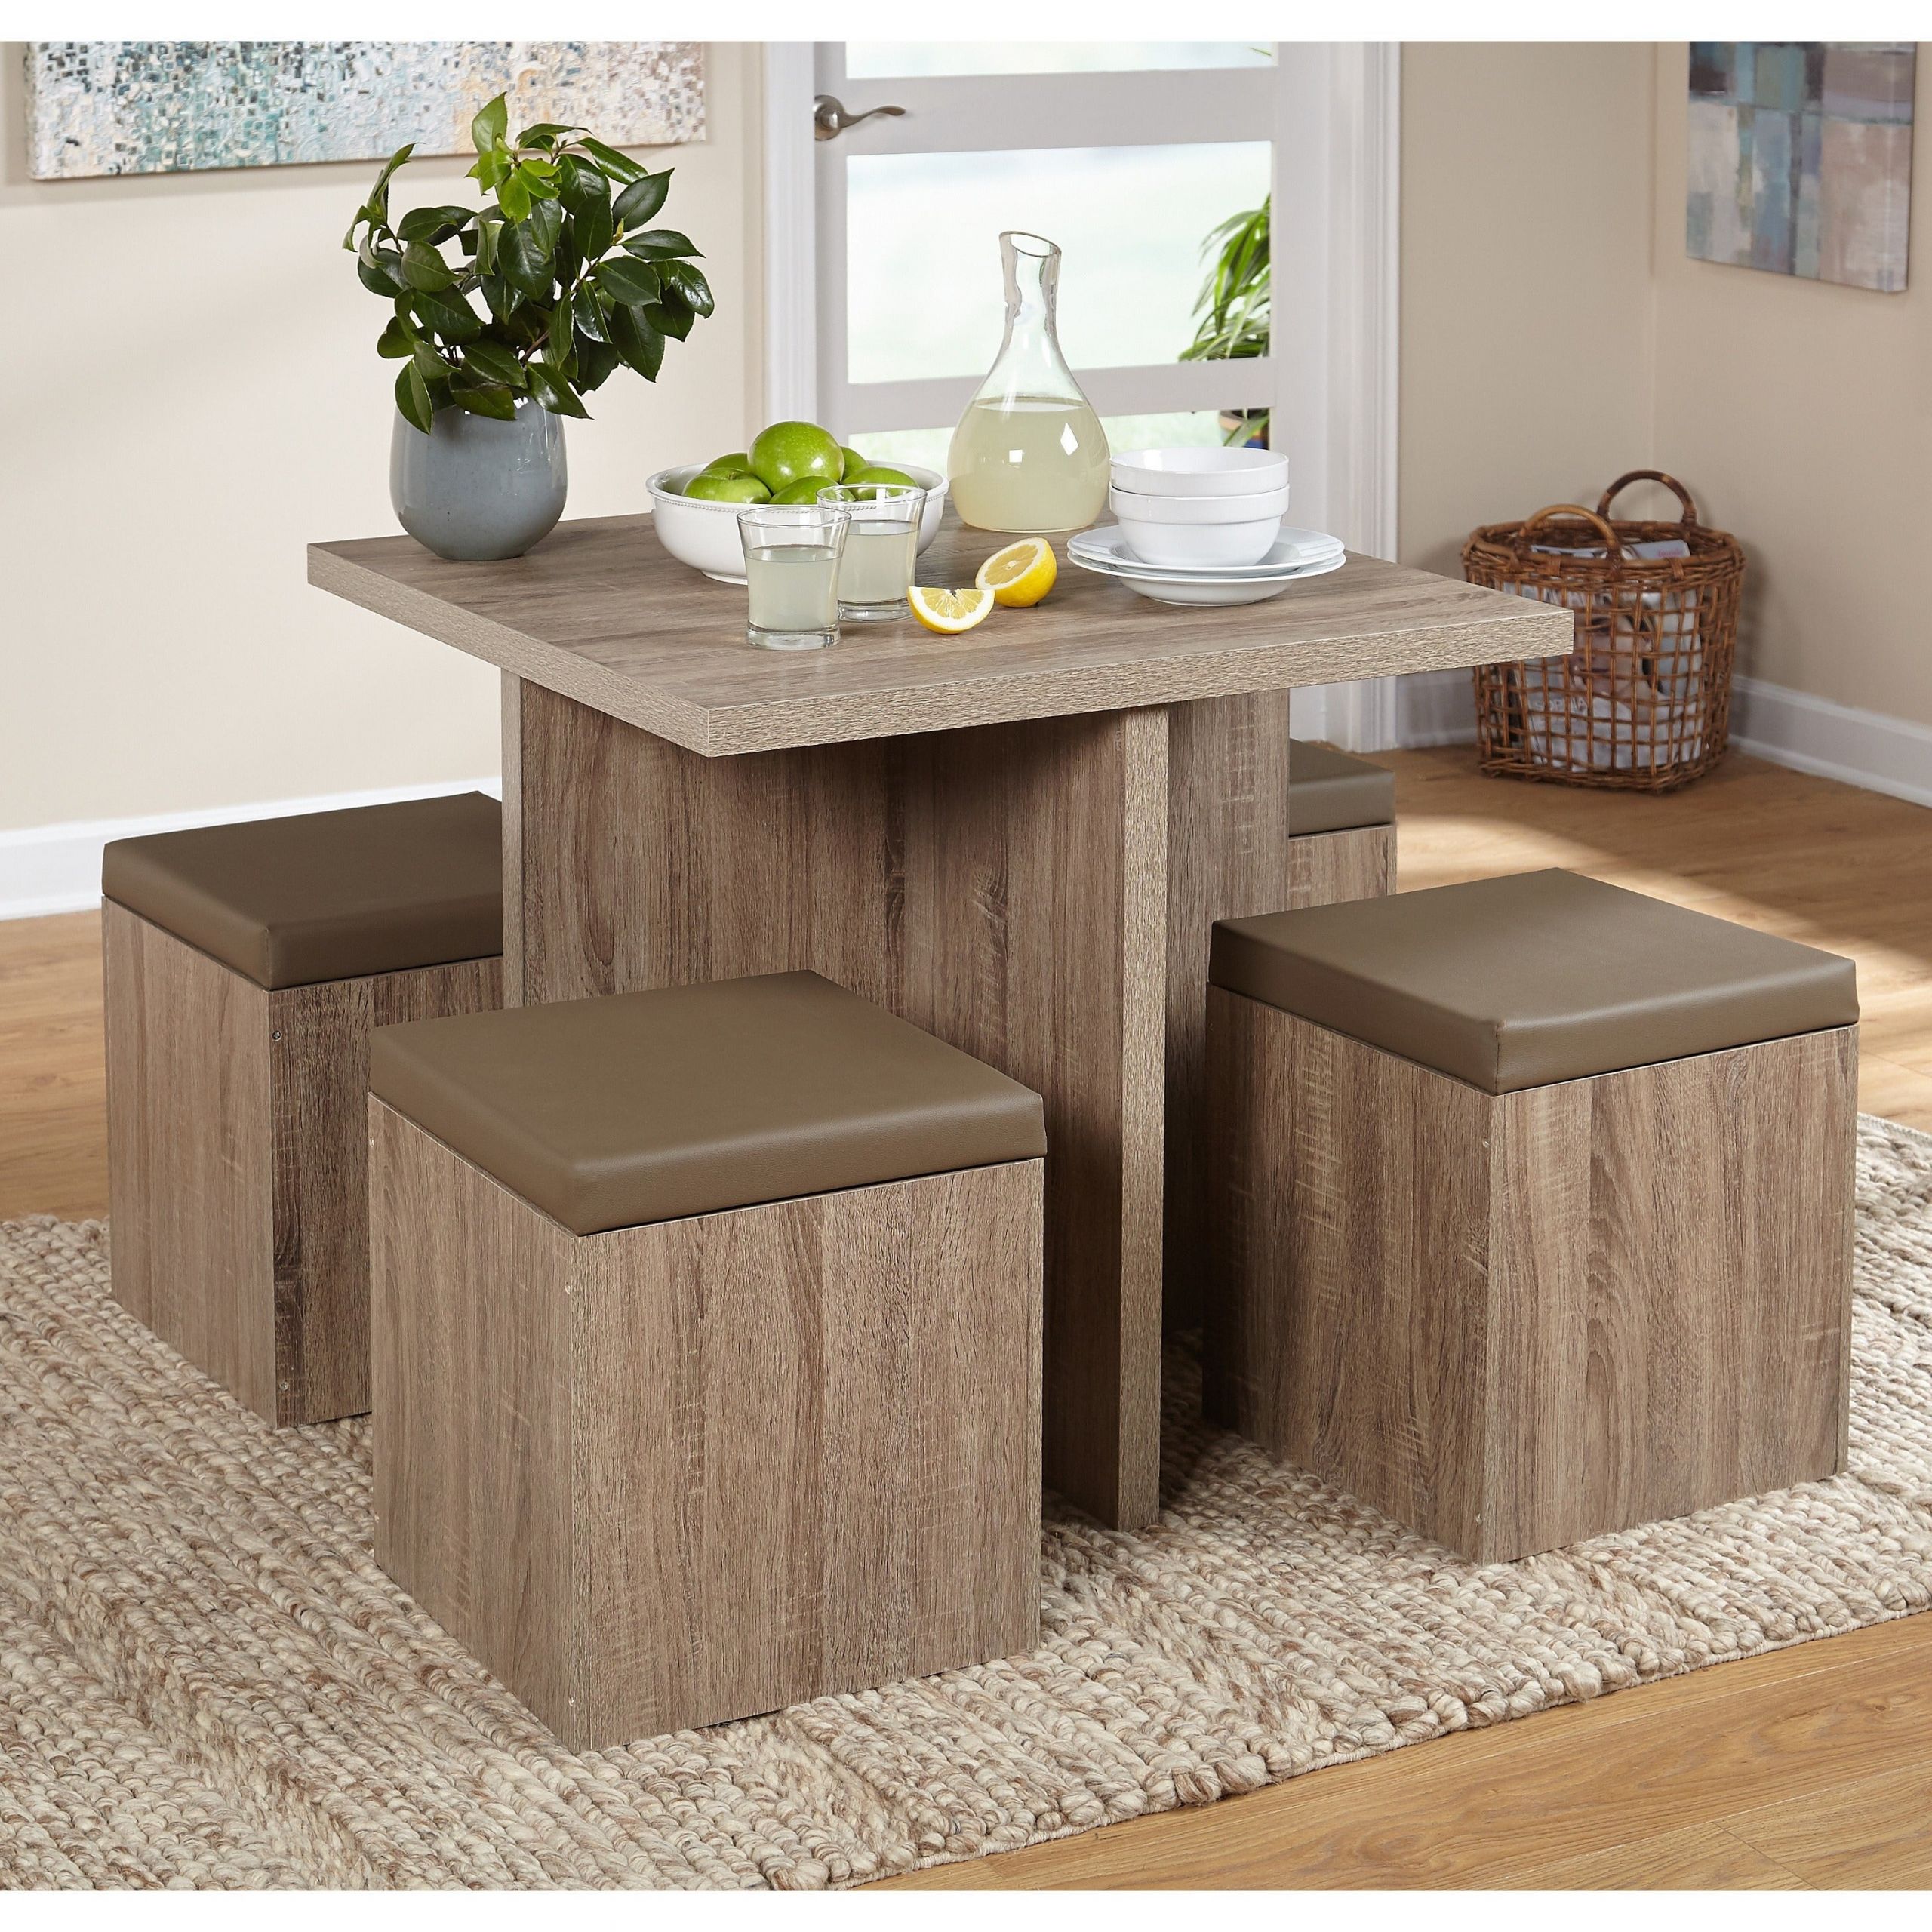 Kitchen Table With Storage
 5 Piece Dining Set Kitchen Table Set with Storage